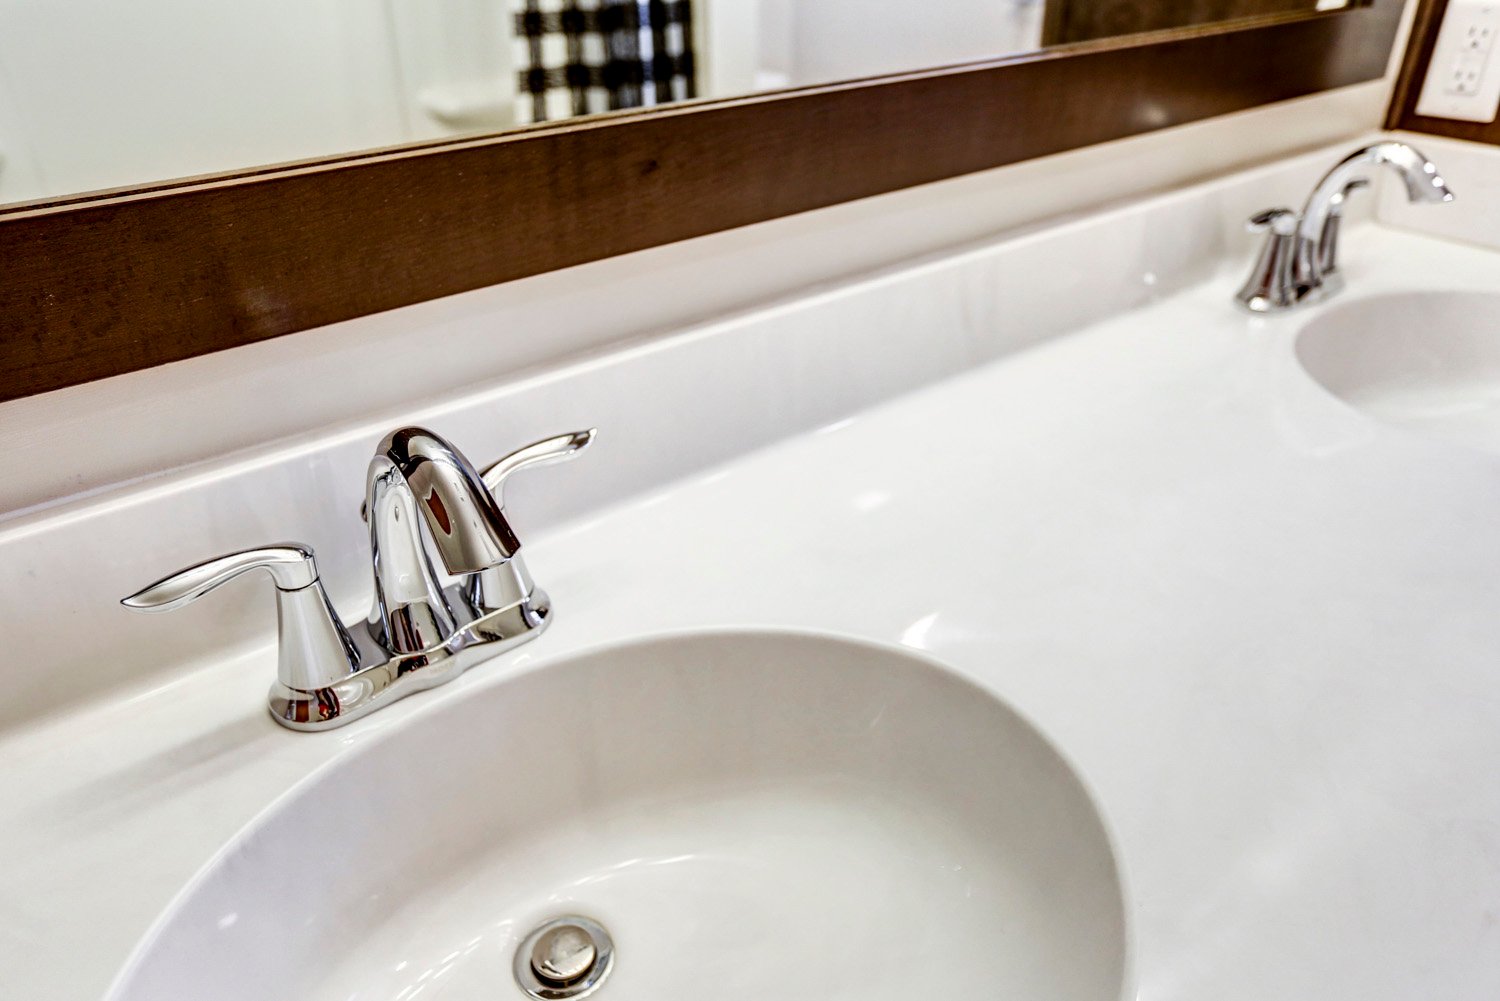 Chrome Faucet and Double Sink Vanity in Manheim Township Bathroom Remodel